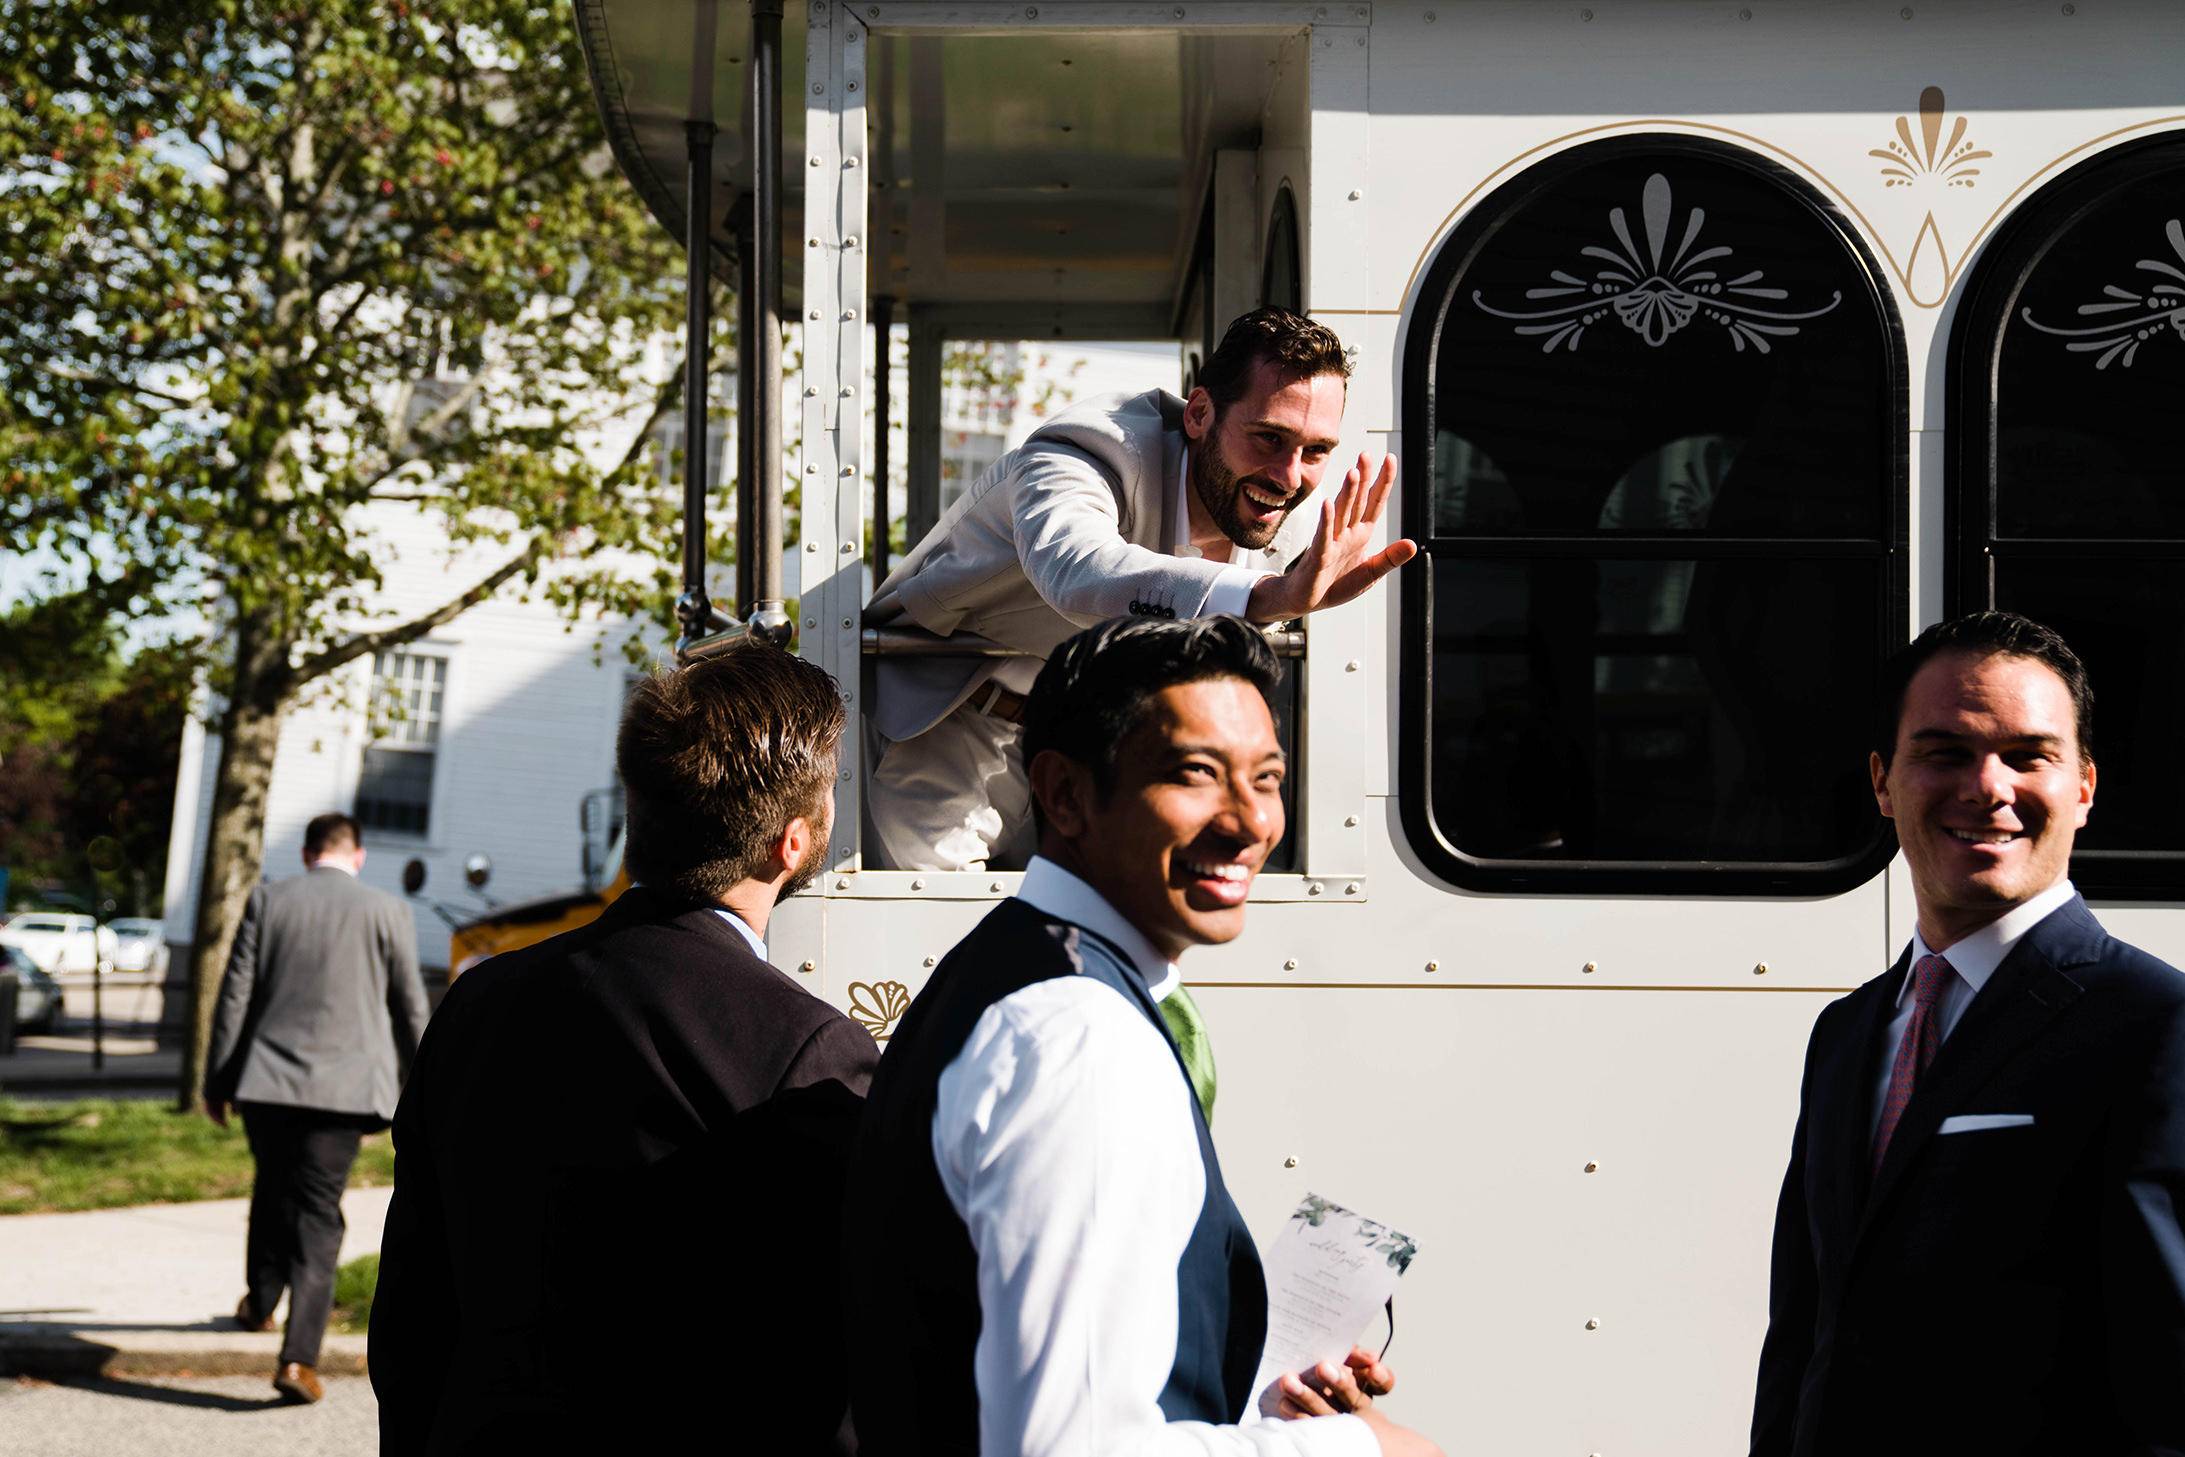 A documentary photograph featured in the best of wedding photography of 2019 showing a groom waving to the guests after his wedding ceremony